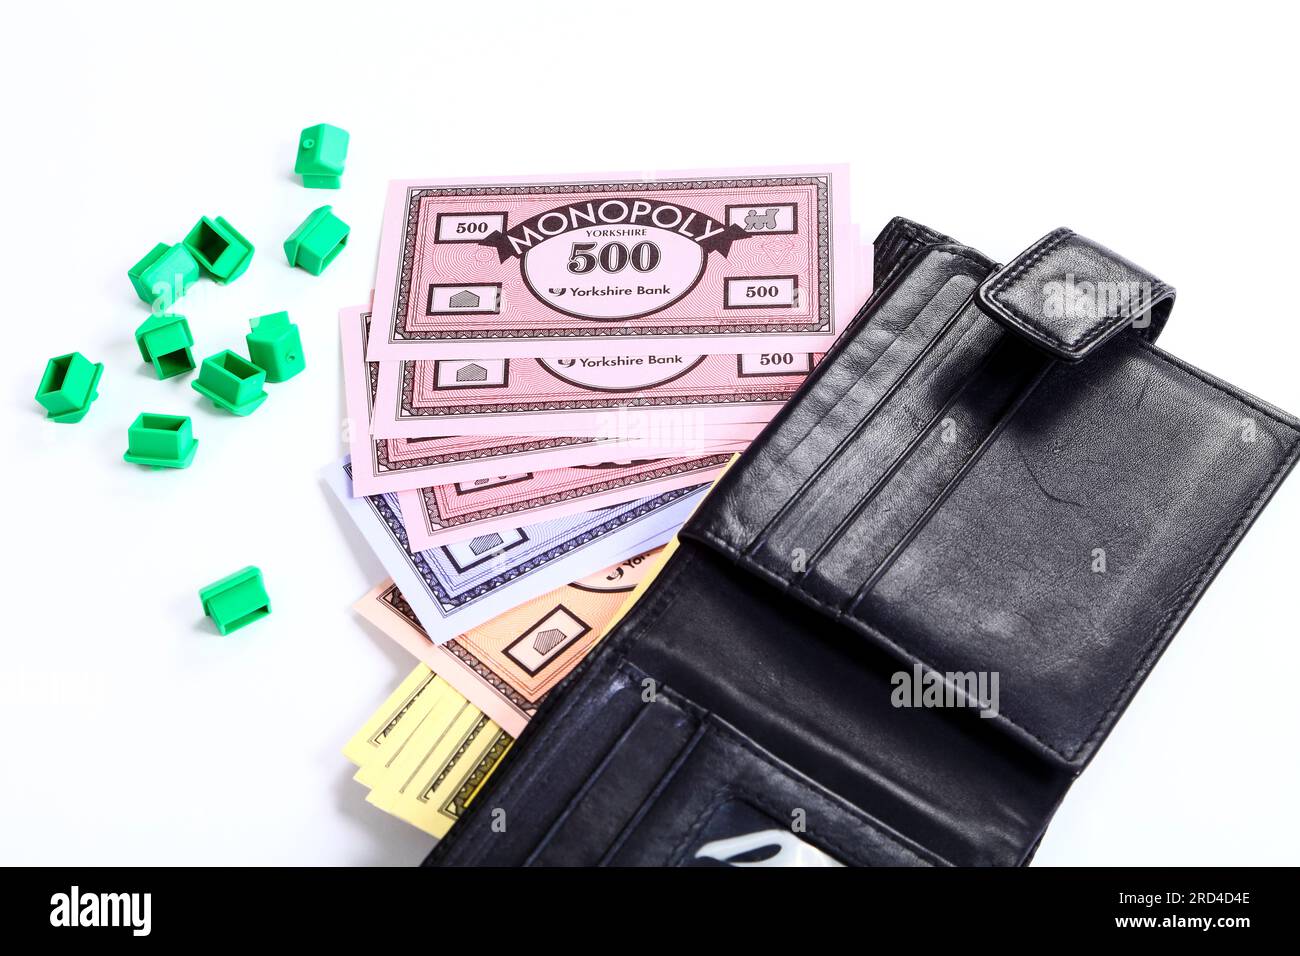 Monopoly green houses and money spilling from a wallet Stock Photo